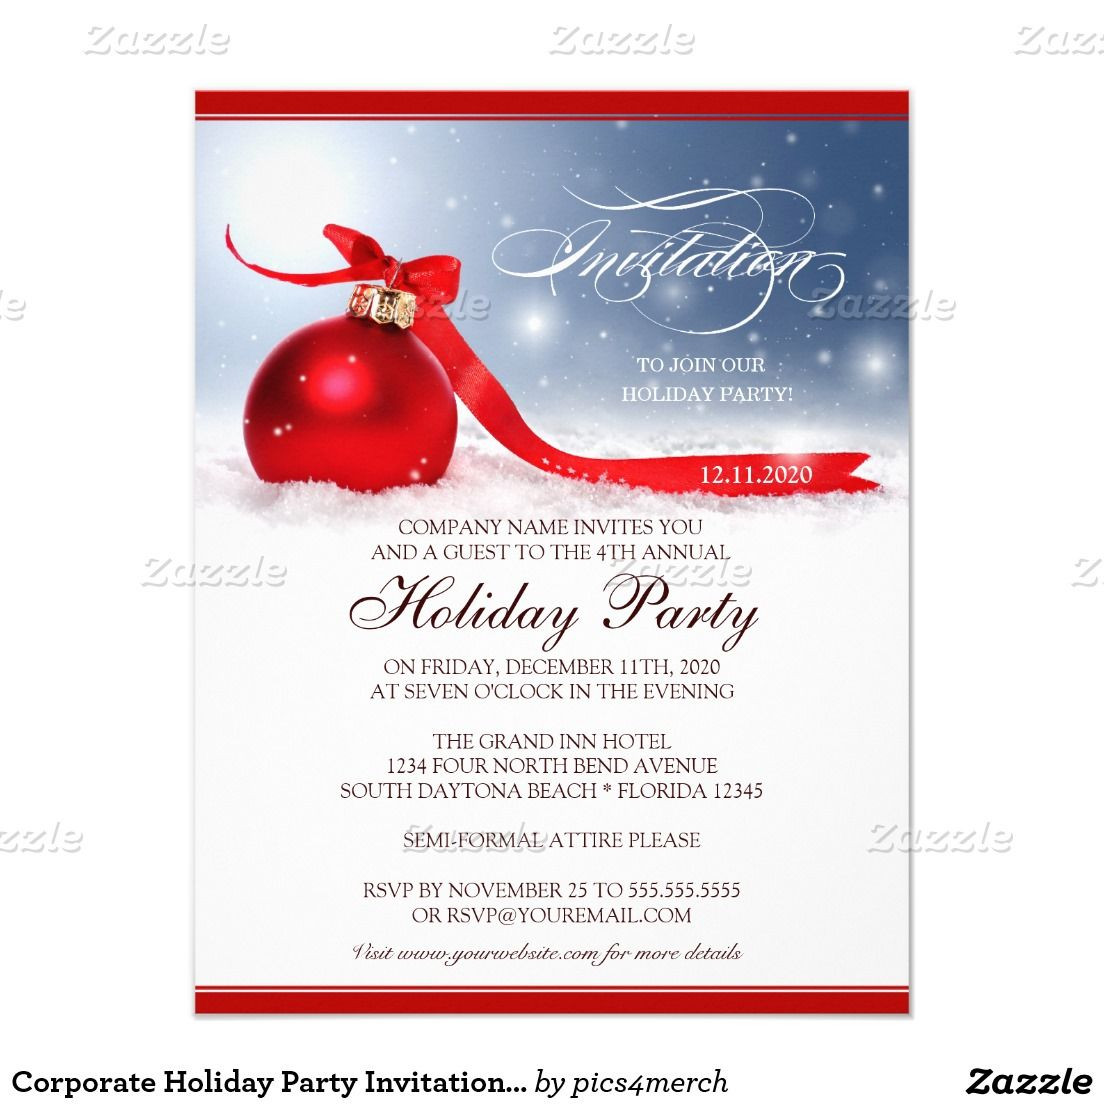 Corporate Holiday Party Ideas 2020
 Corporate Holiday Party Invitation Template